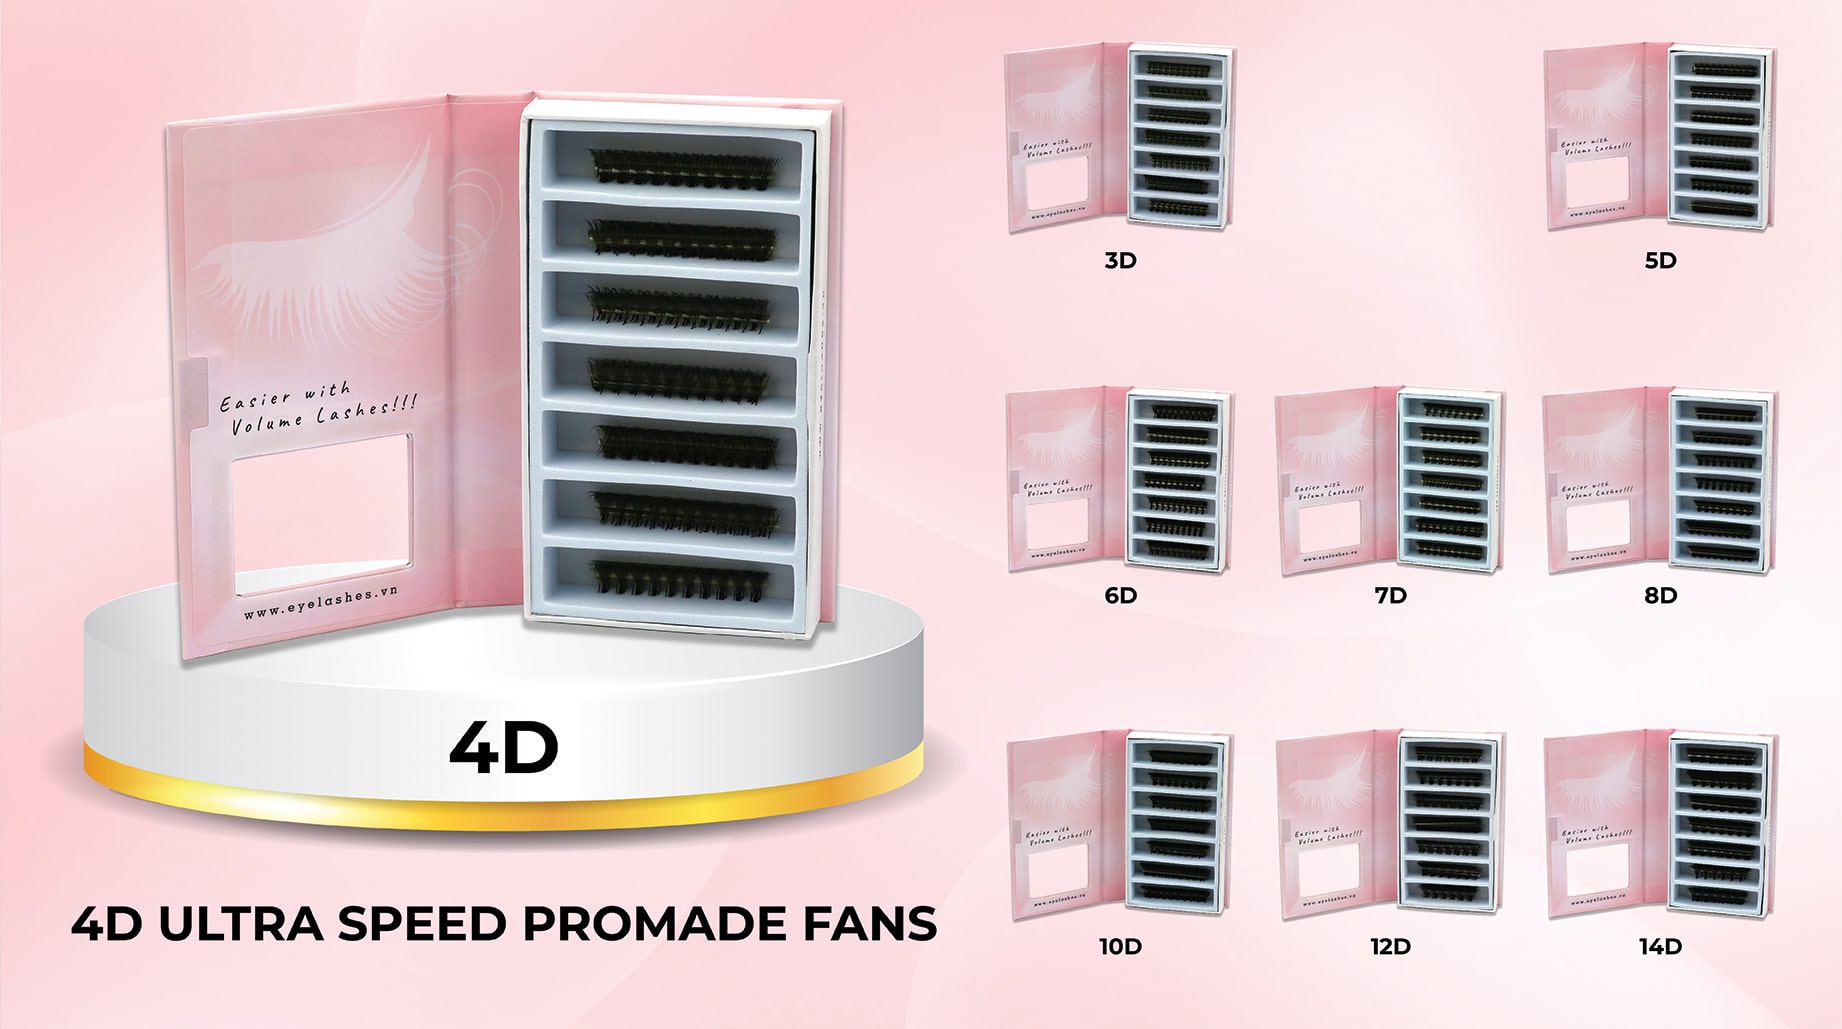 Ultra-Speed-4D-promade-fan-wholesale-eyelash-supplier-VNLASHES